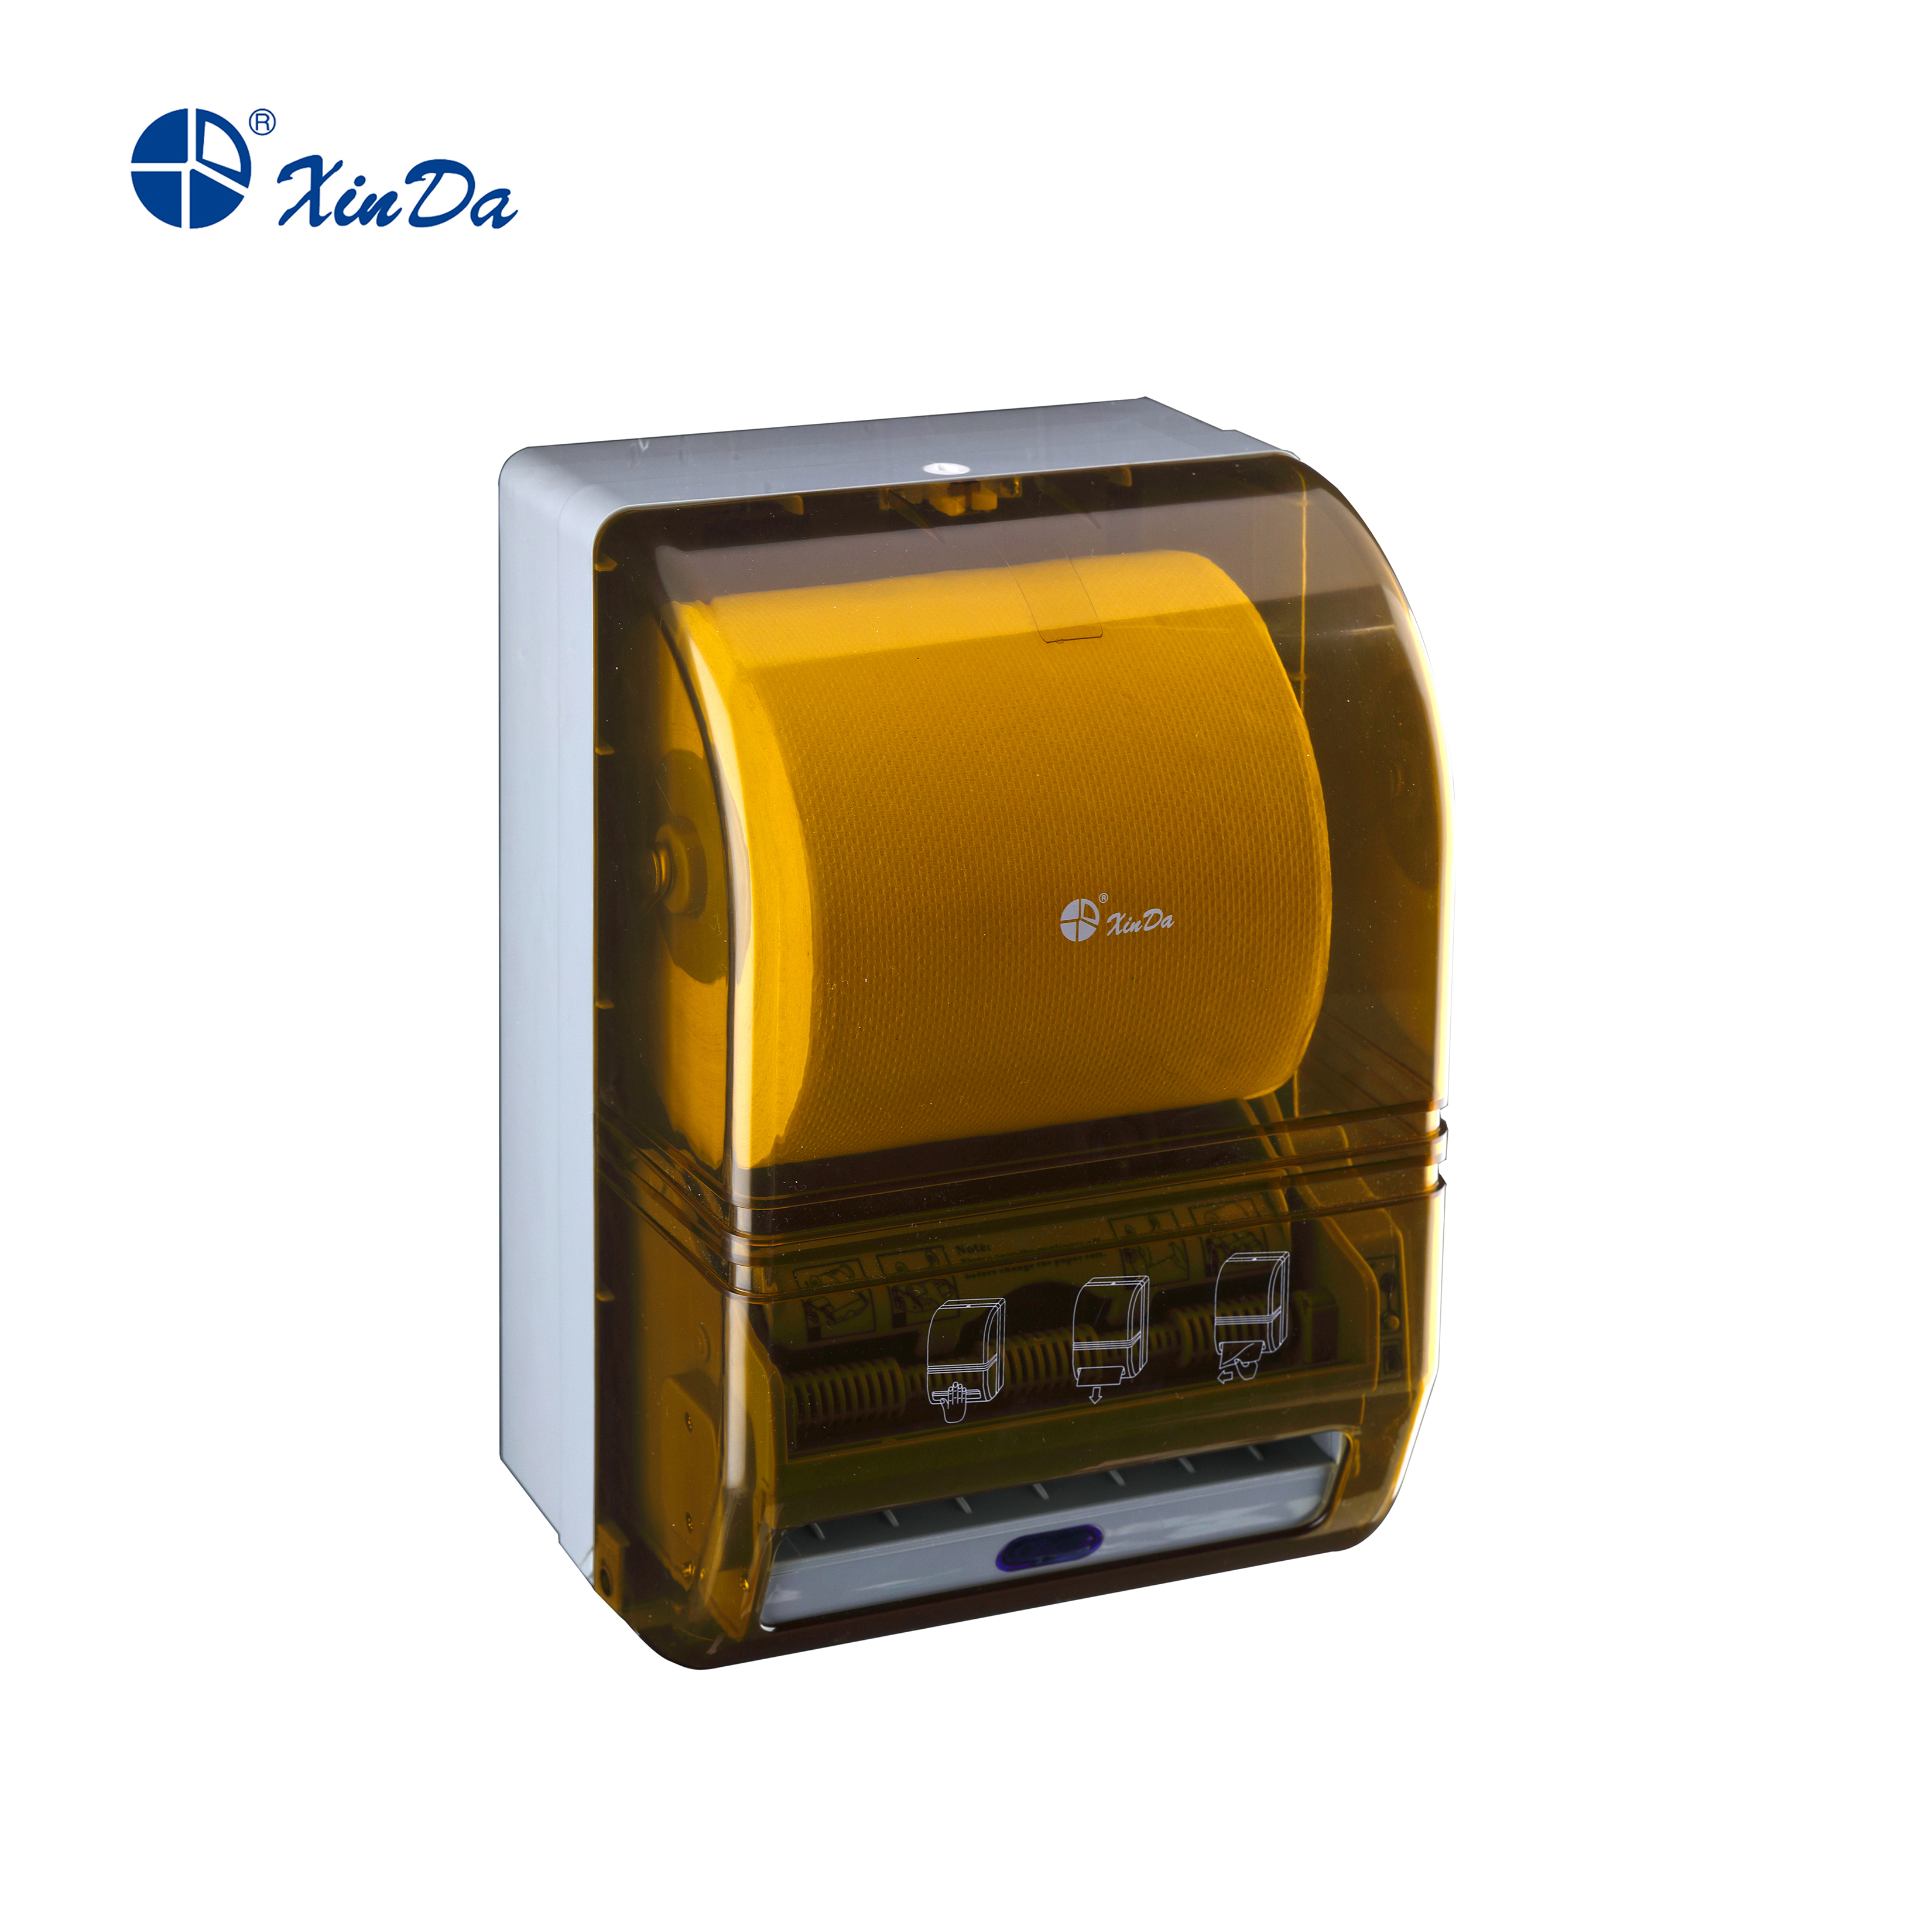 Wall-mounted Plastic Auto Paper Towel Dispenser